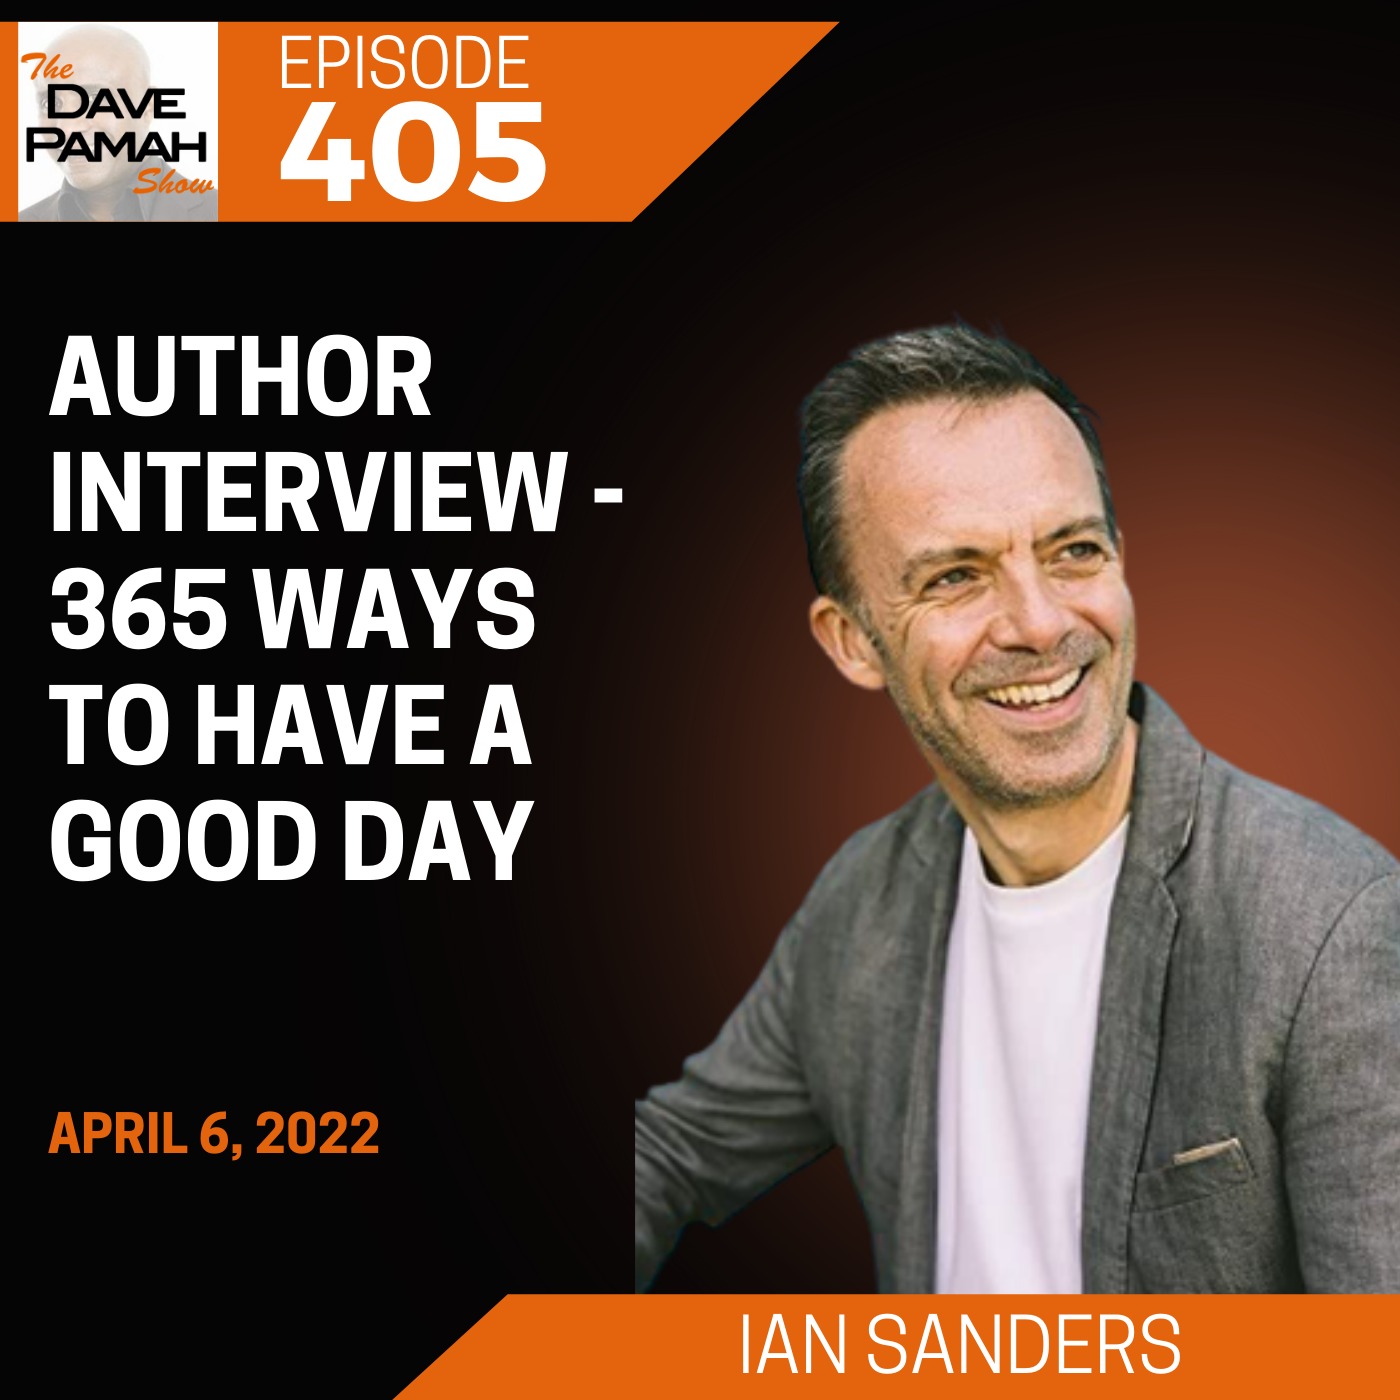 Author Interview - 365 ways to have a good day with Ian Sanders